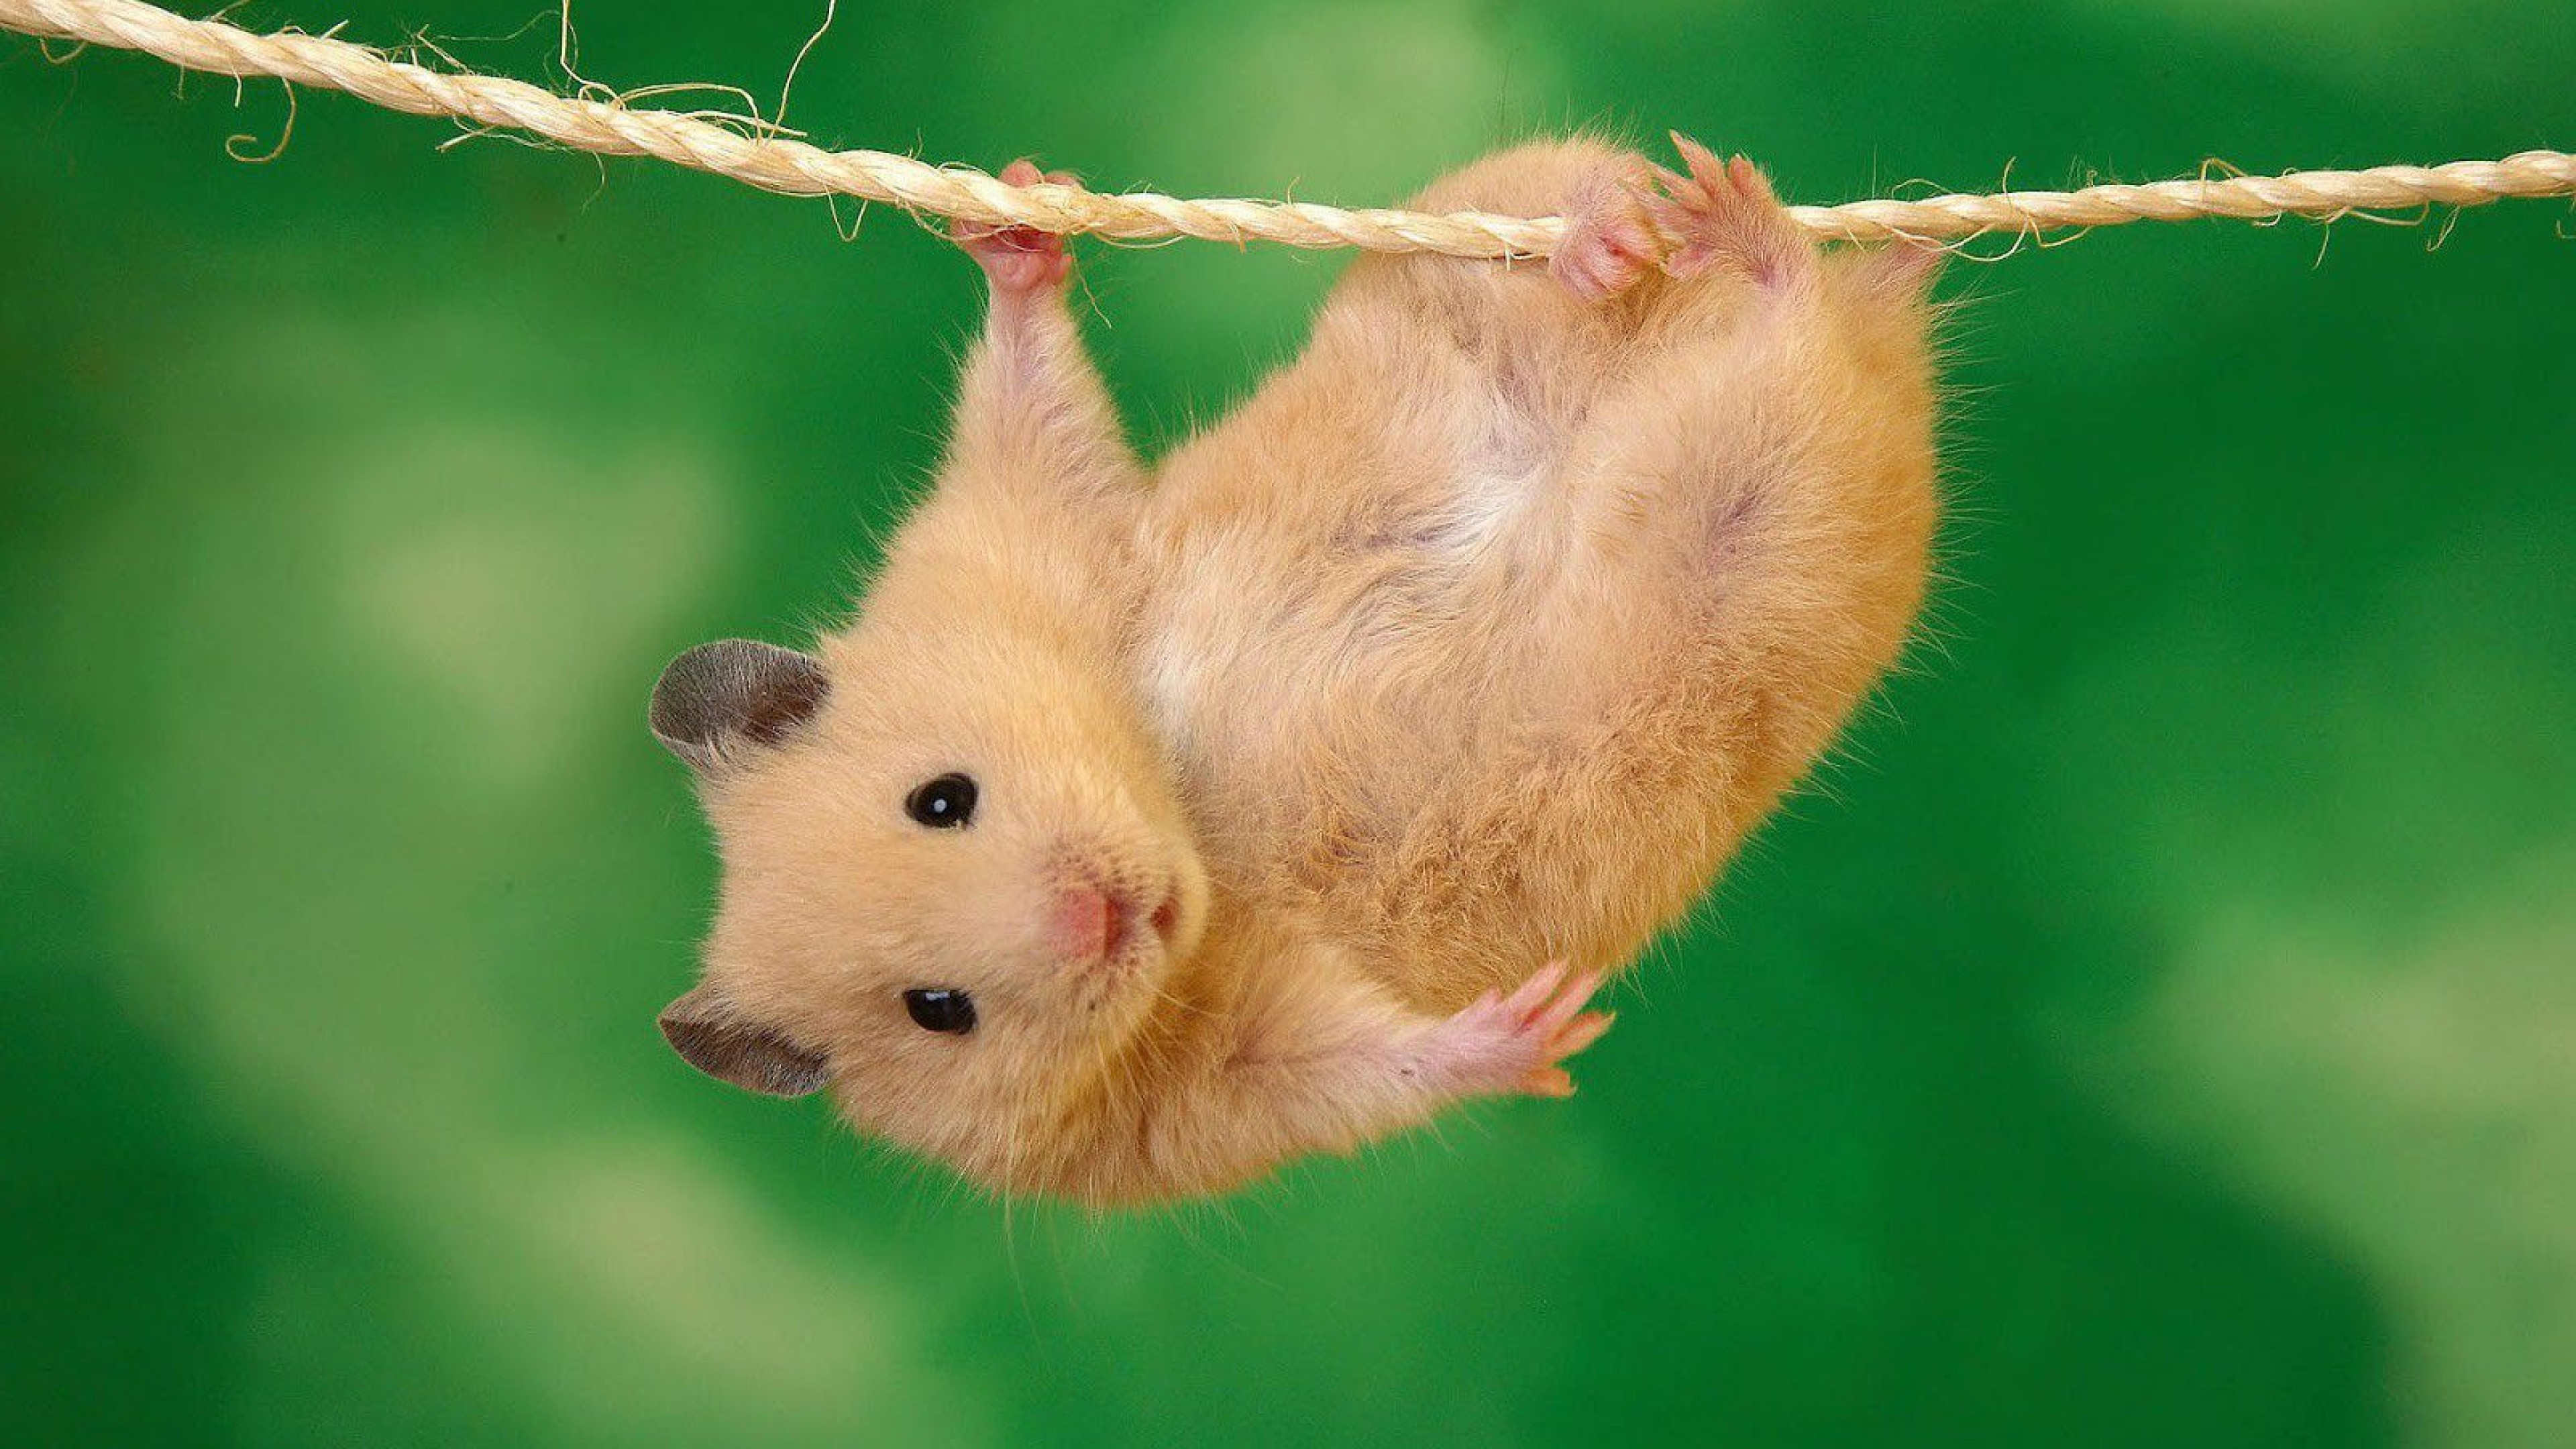 Cute hamster, Photo collection, Wholesome images, Screensaver-worthy, 3840x2160 4K Desktop